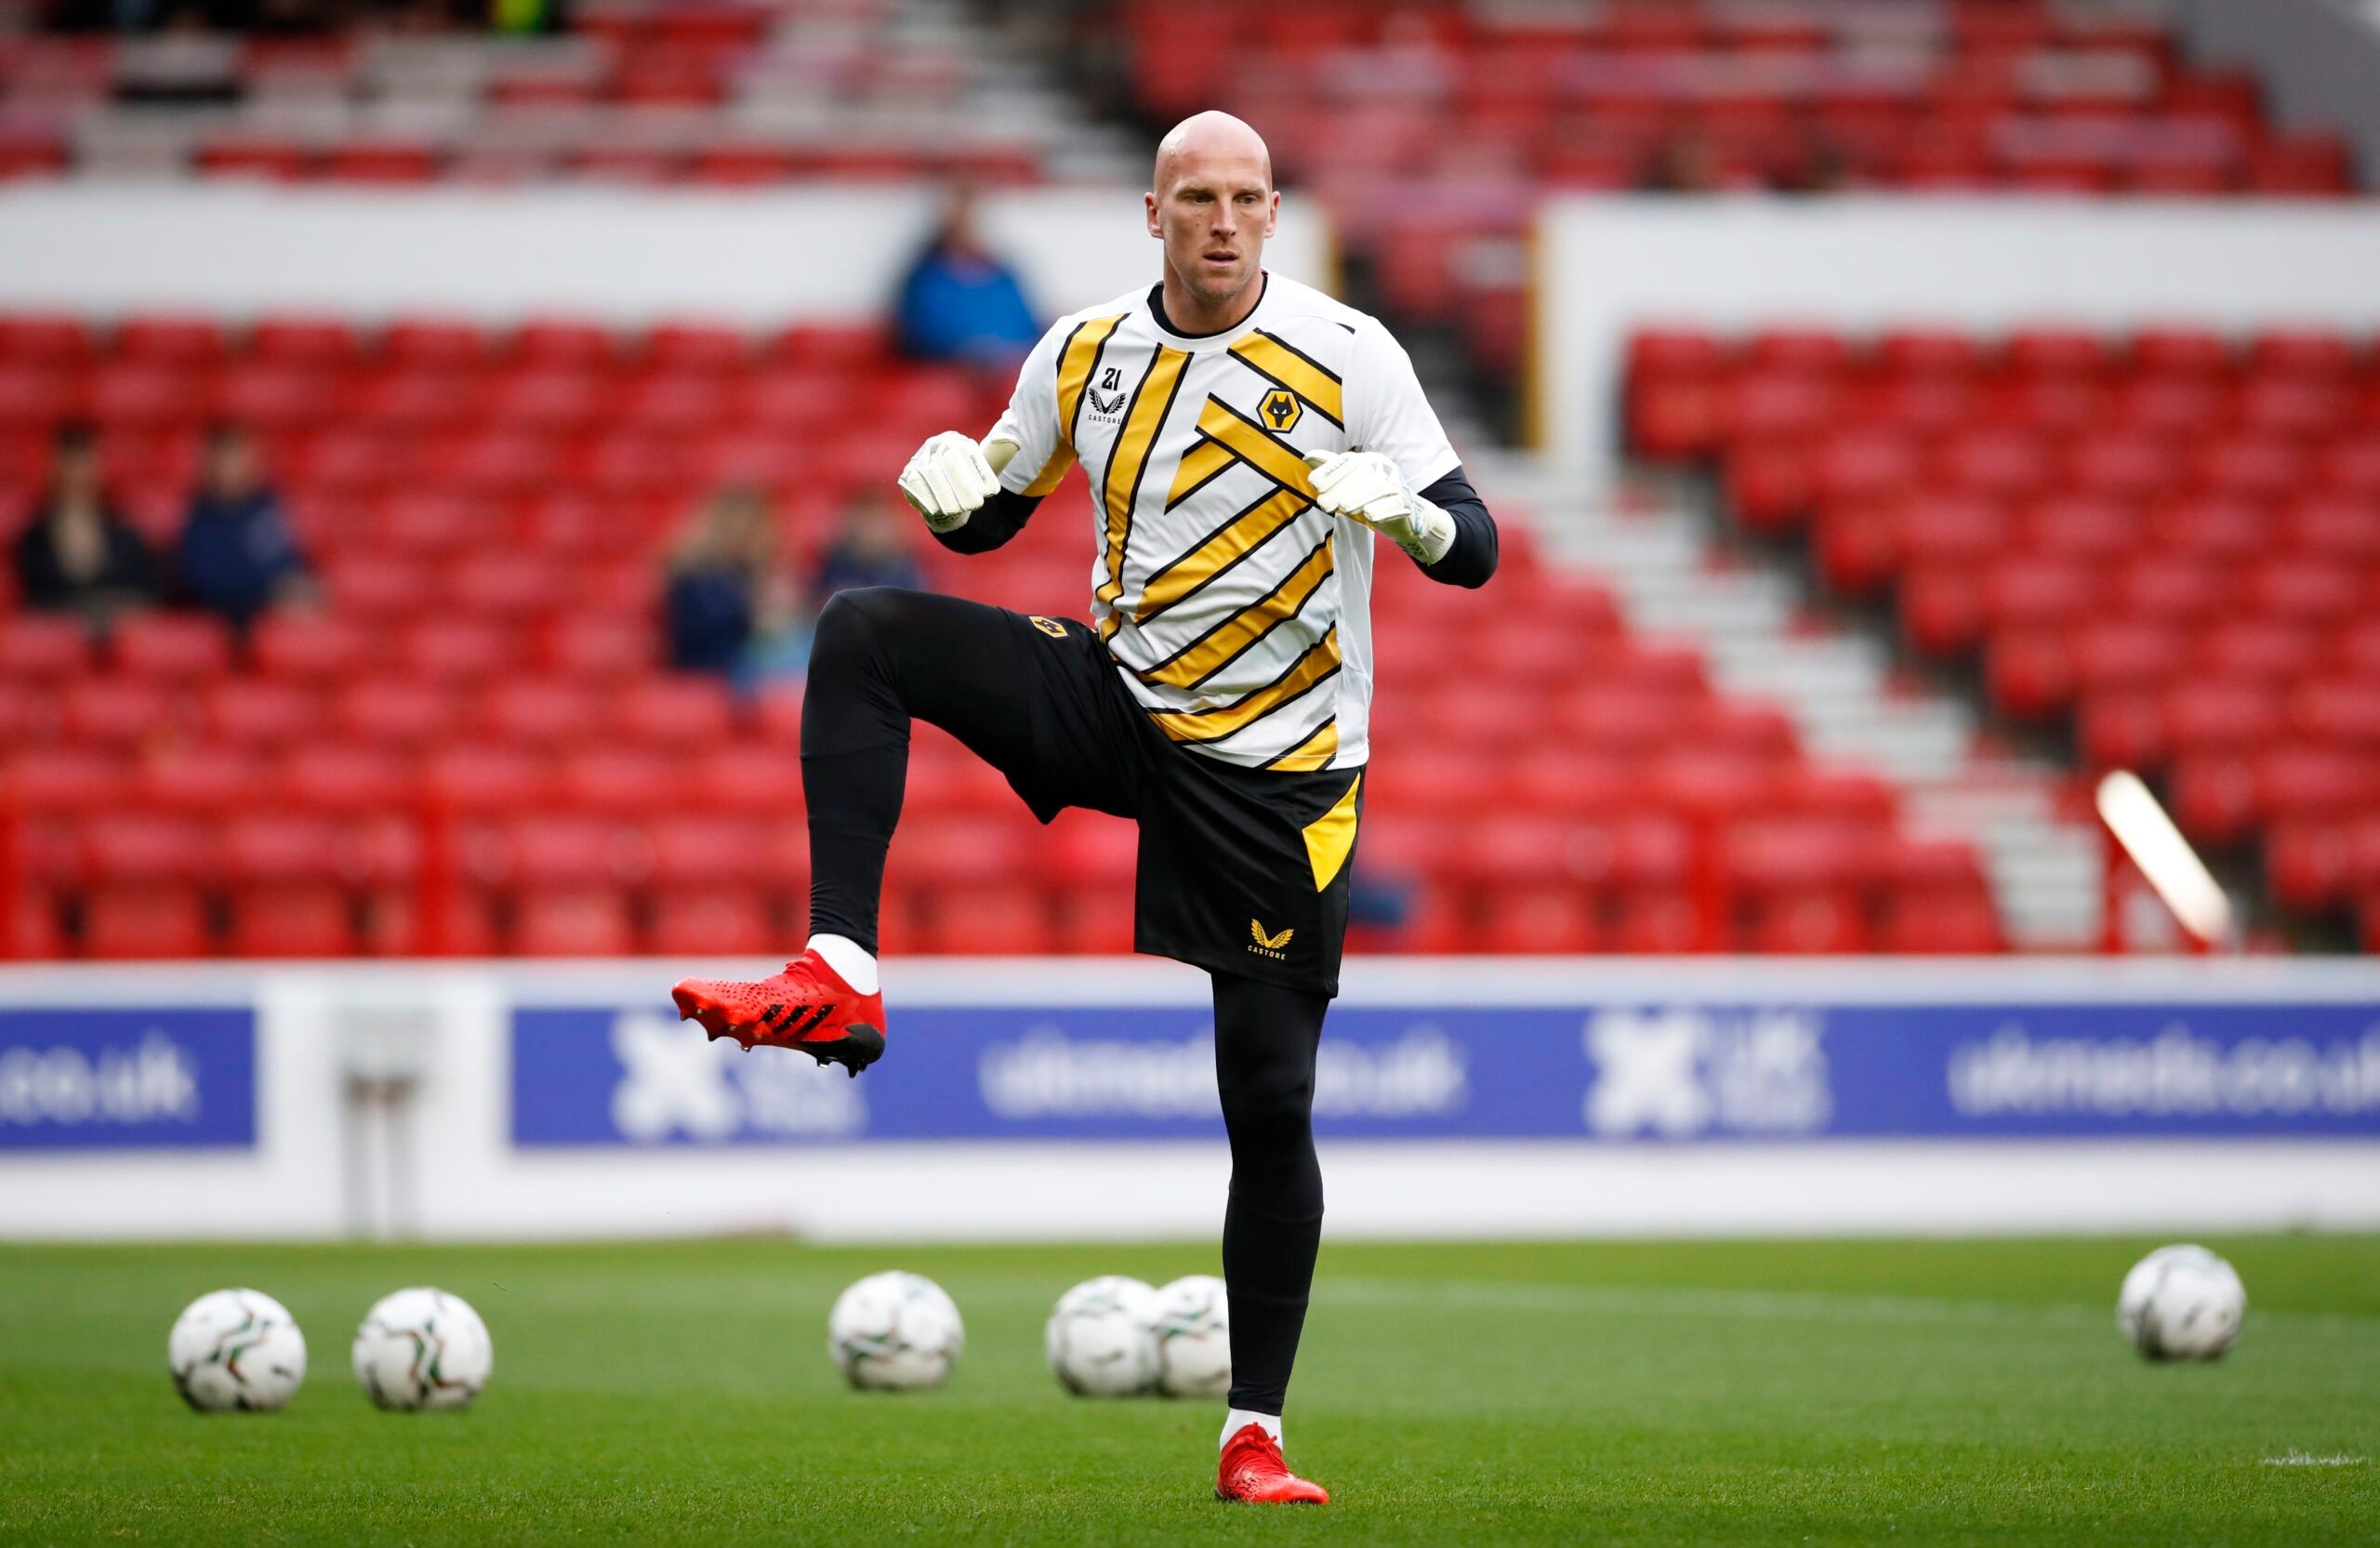 Soccer - England - Carabao Cup Second Round - Nottingham Forest v Wolverhampton Wanderers - The City Ground, Nottingham, Britain - August 24, 2021 Wolverhampton Wanderers' John Ruddy during the warm up before the match Action Images via Reuters/Andrew Boyers